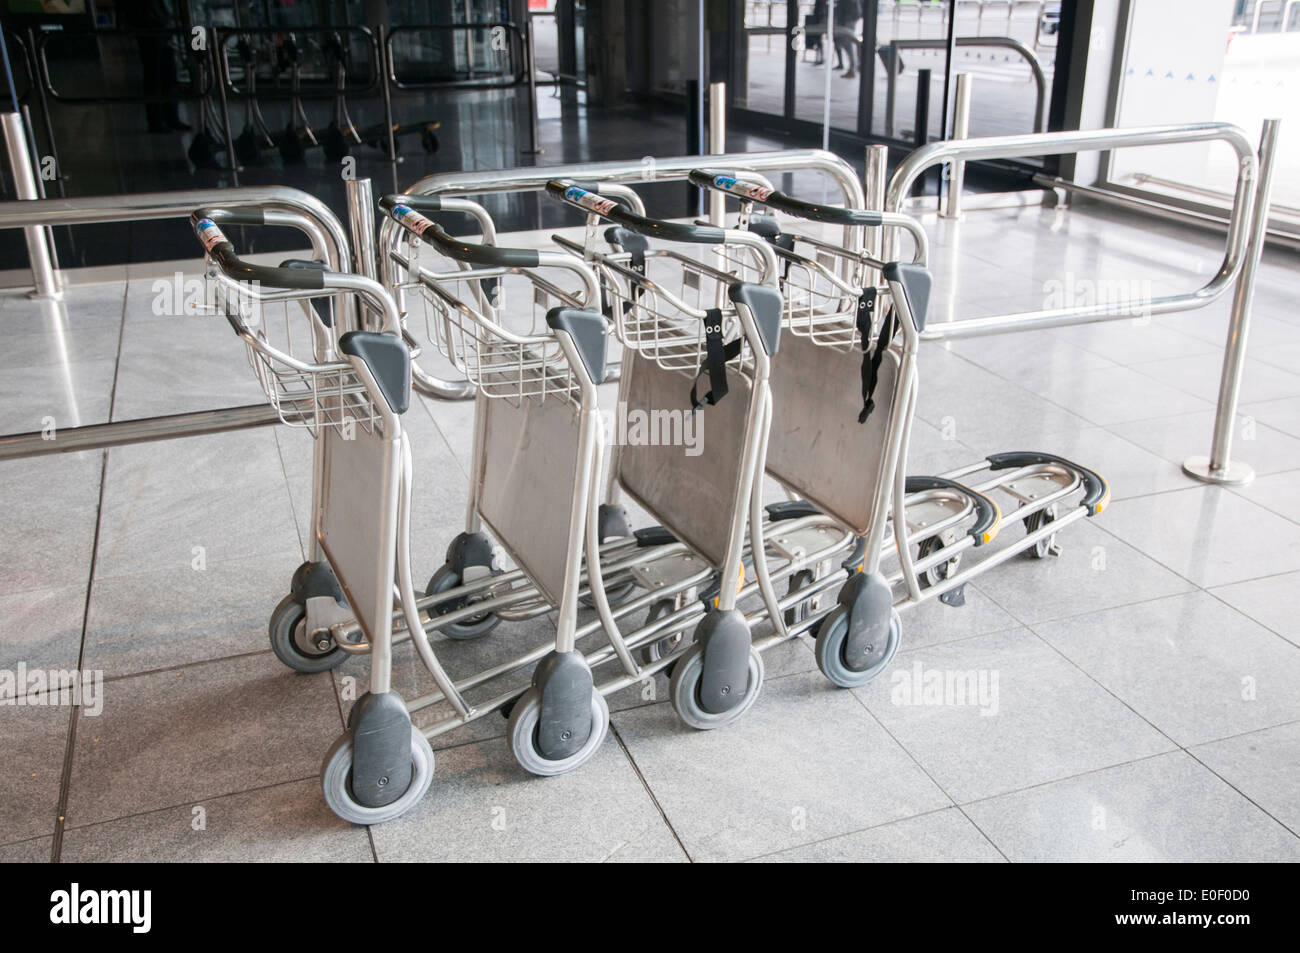 luggage carts at Barcelona airport, Spain Stock Photo